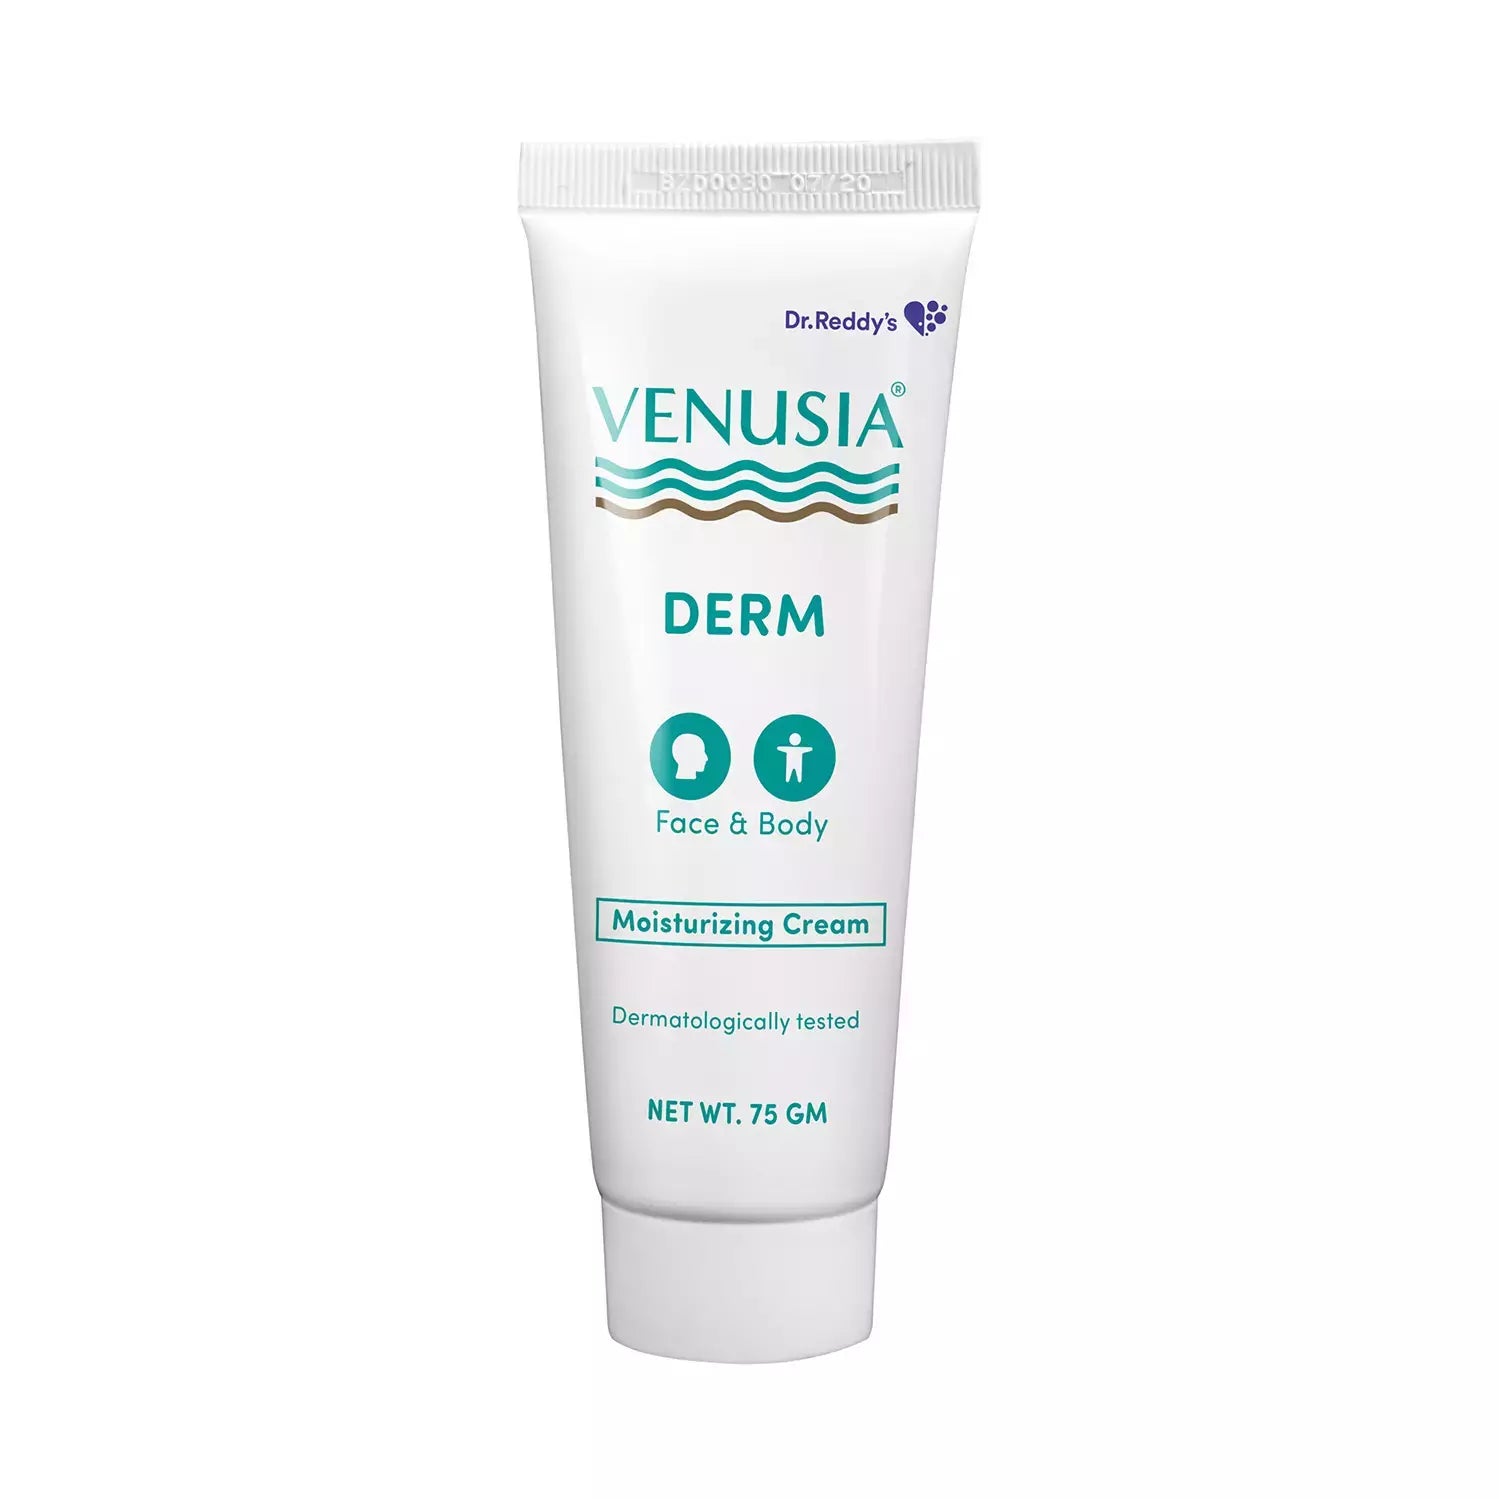 Venusia Cream Derm 75GM (Dr. Reddys) for a norishing and moisturing your skin